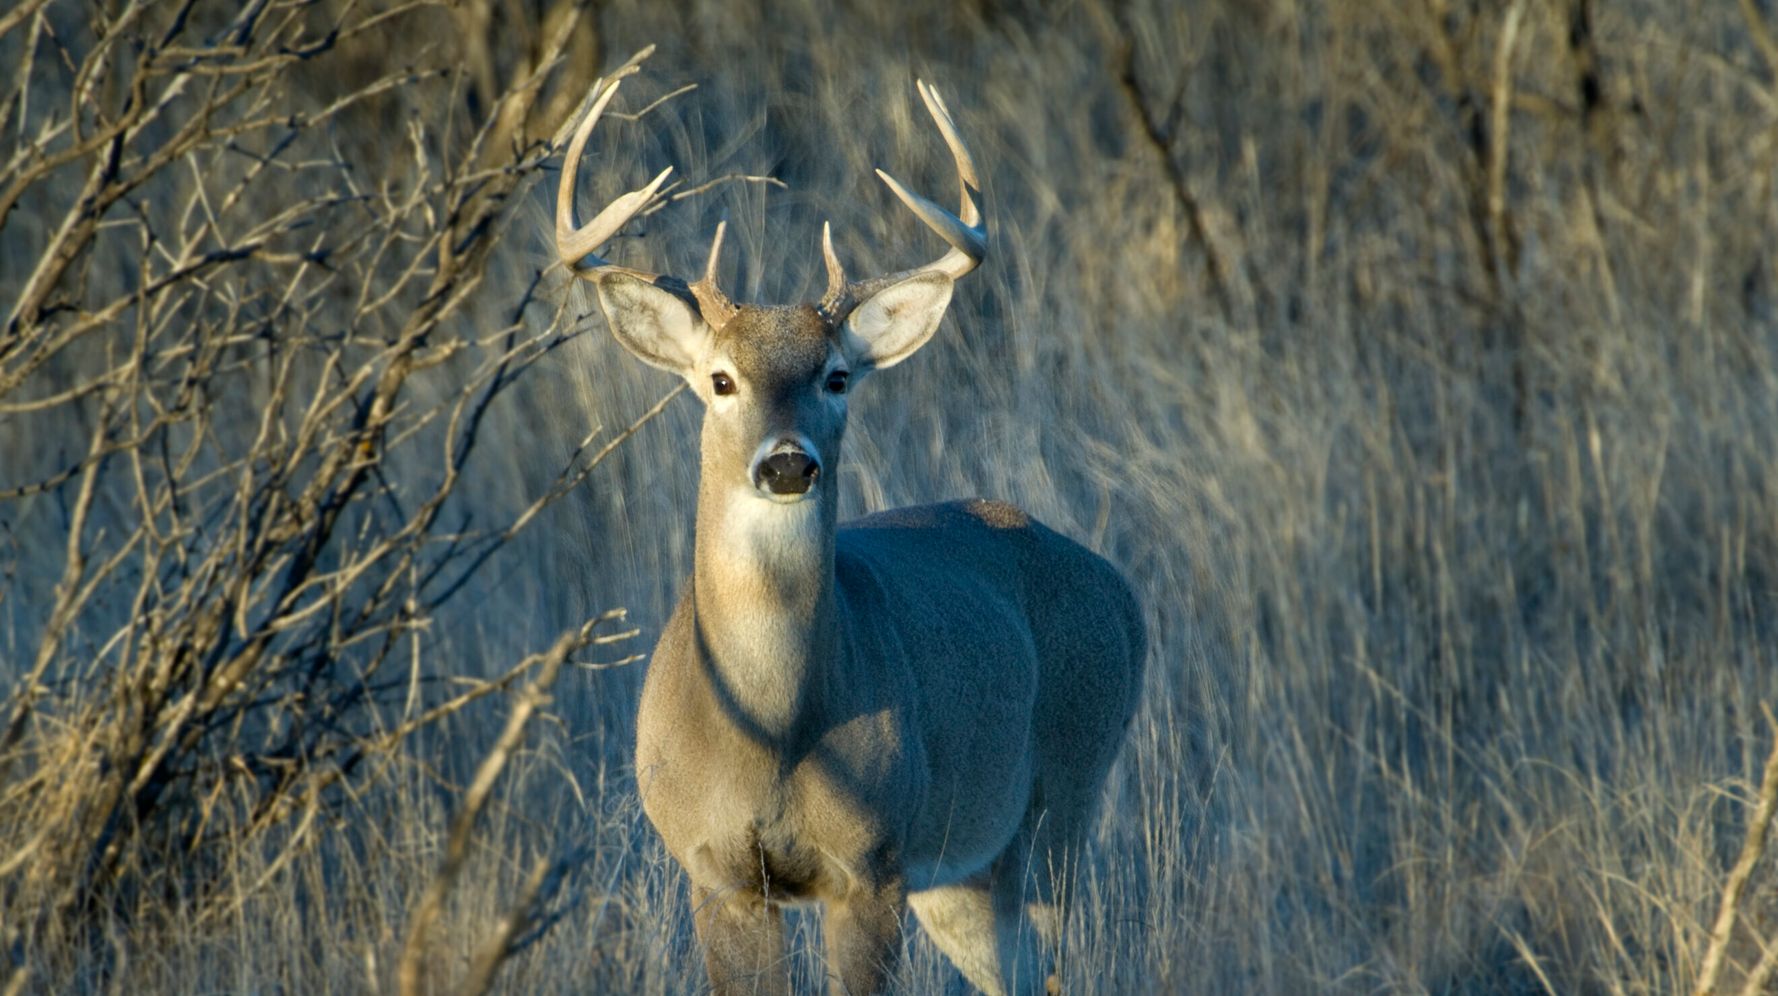 A Texas Rancher Cloned Deer For Years. Some Lawmakers Want To Legalize It.